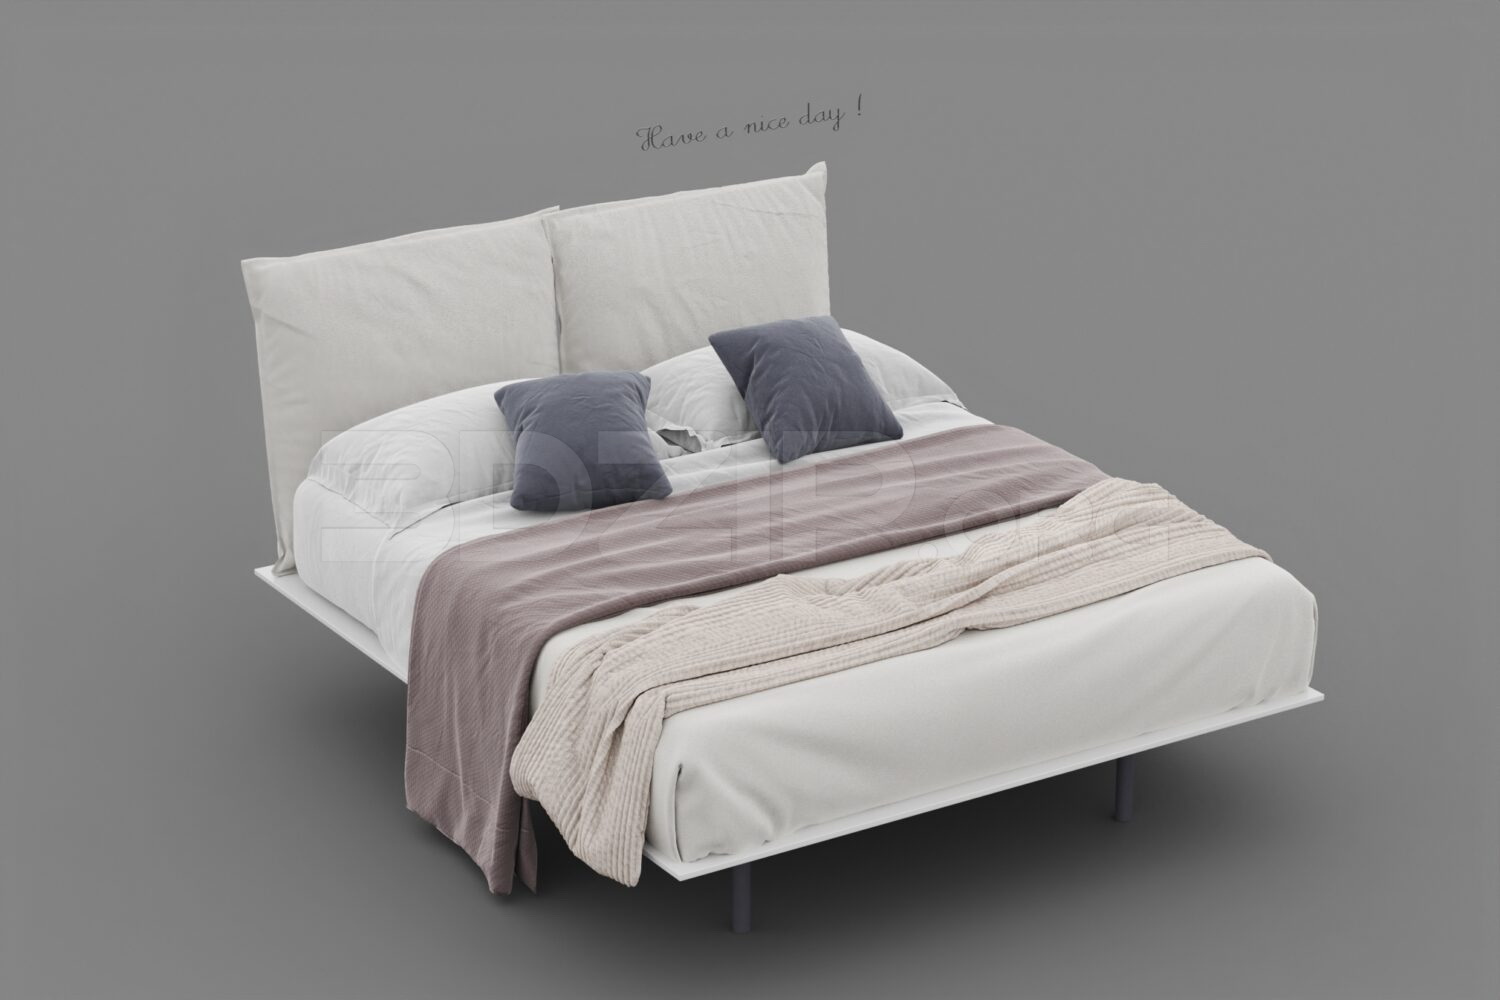 267. Download Free Bed Model By Dat Nguyen